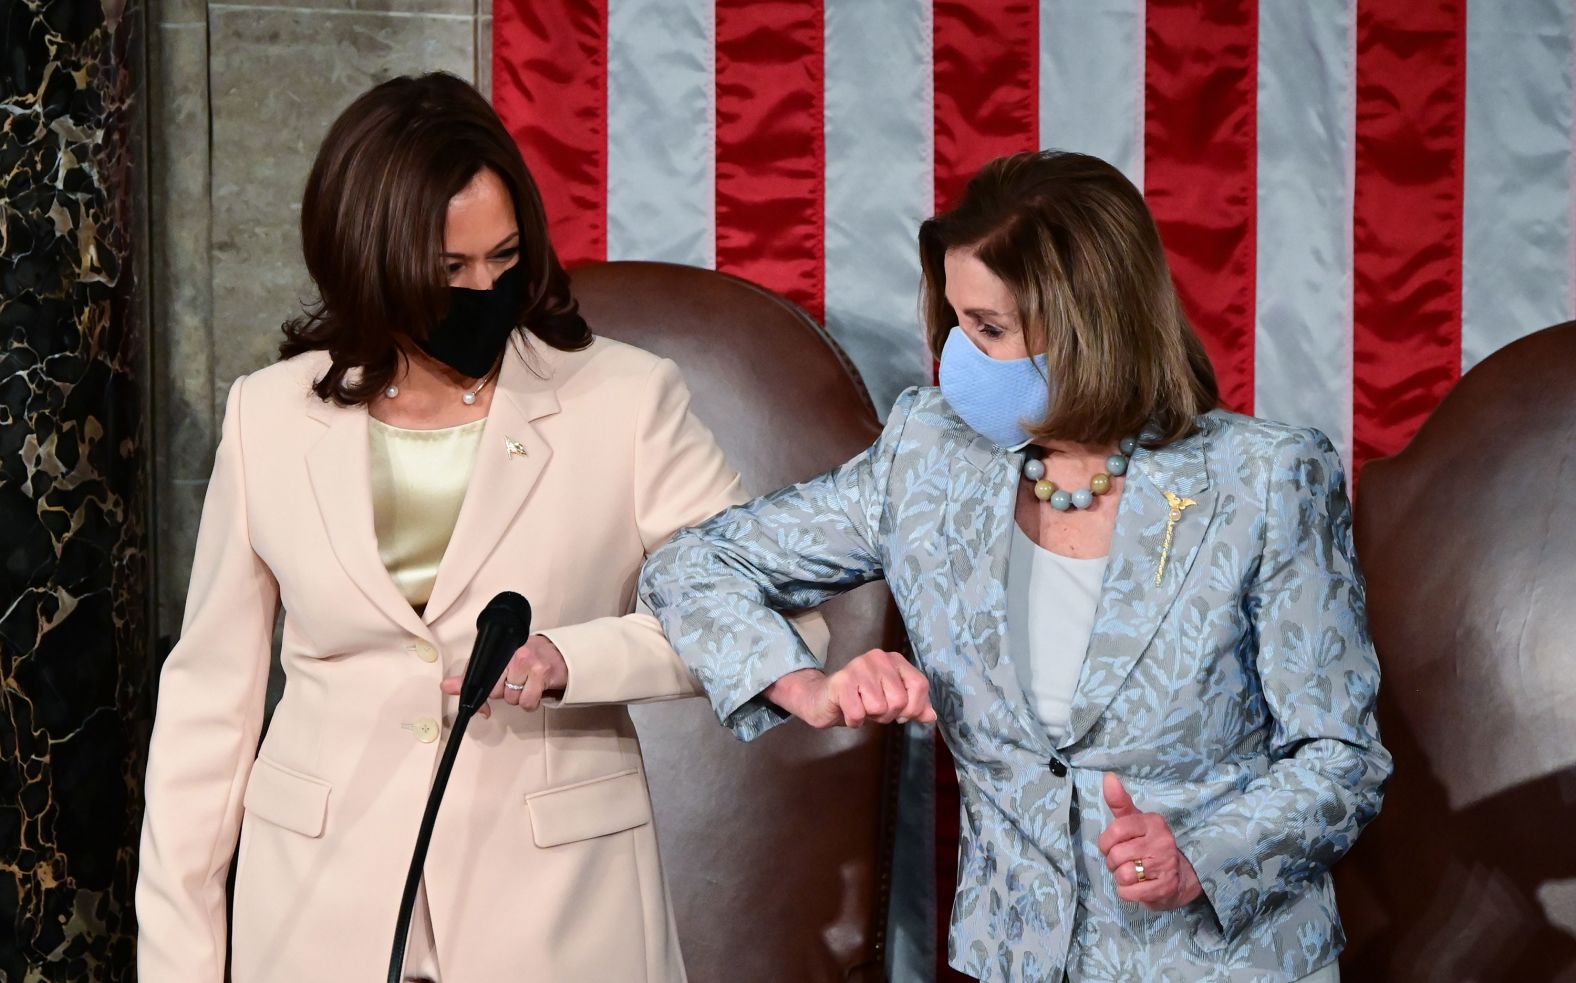 Vice President Kamala Harris greets Pelosi with an elbow bump before <a href="index.php?page=&url=https%3A%2F%2Fwww.cnn.com%2F2021%2F04%2F28%2Fpolitics%2Fgallery%2Fbiden-first-address-joint-session-congress%2Findex.html" target="_blank">President Biden's address to Congress</a> in April 2021. It was the first time in history that two women were seated behind the President for a joint address. 